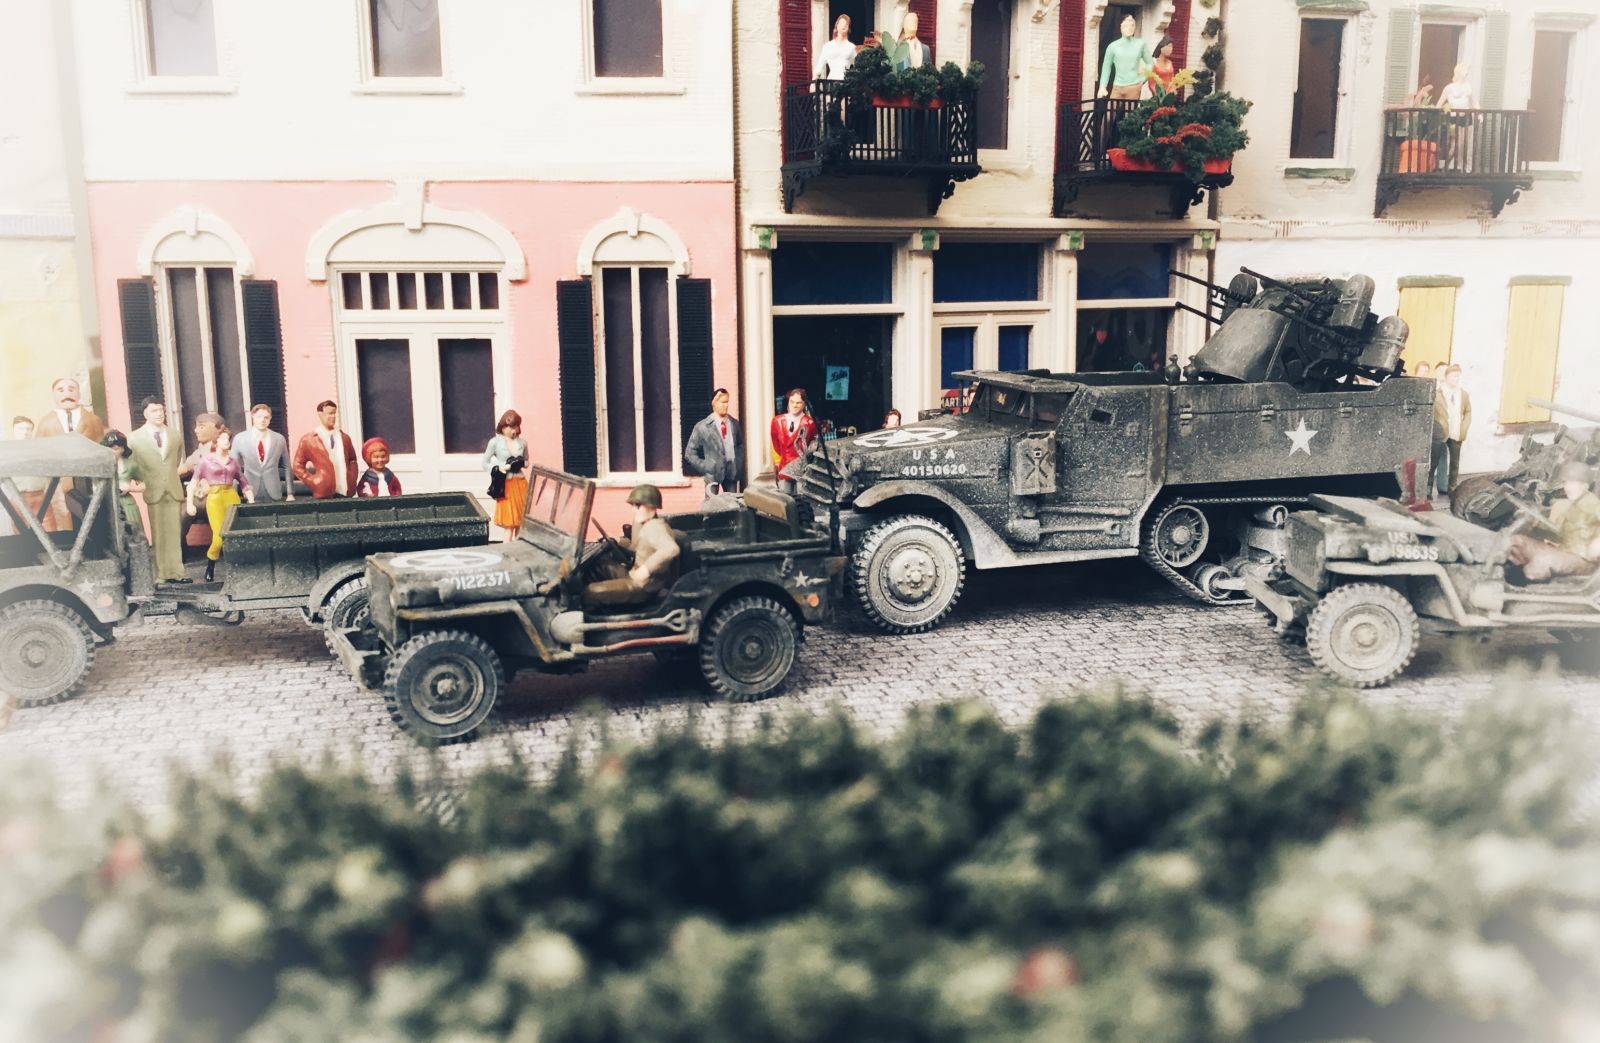 Illustration for article titled Military Monday: 1/43 Scale Convoy